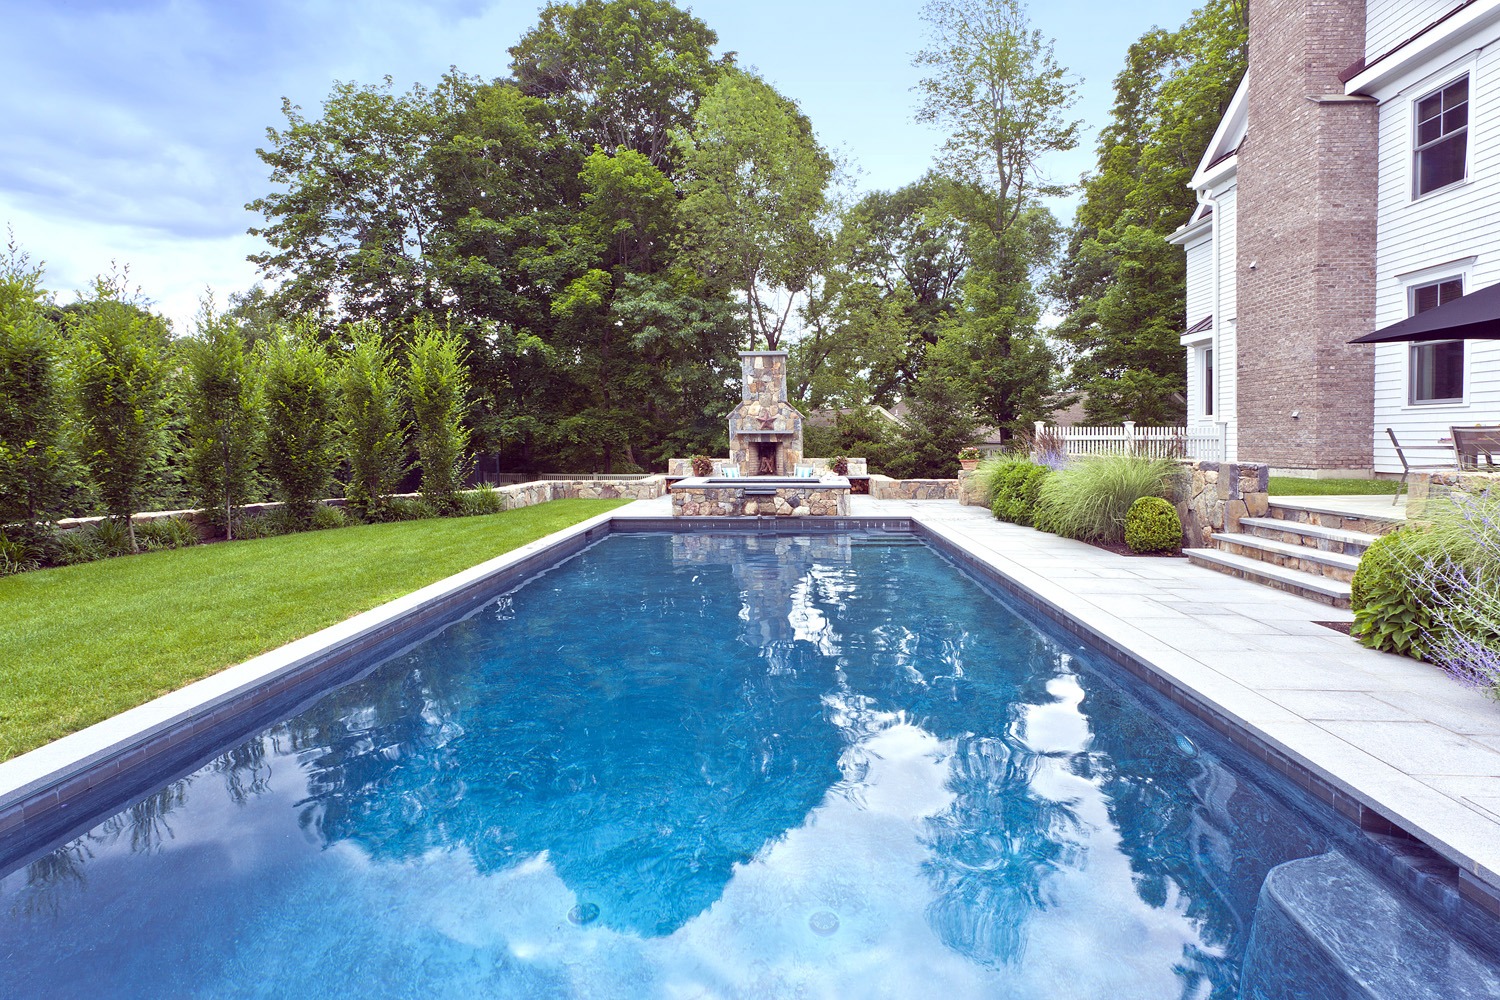 A serene backyard with a rectangular pool, stone fountain, lush greenery, and a brick house with white trim under a partly cloudy sky.